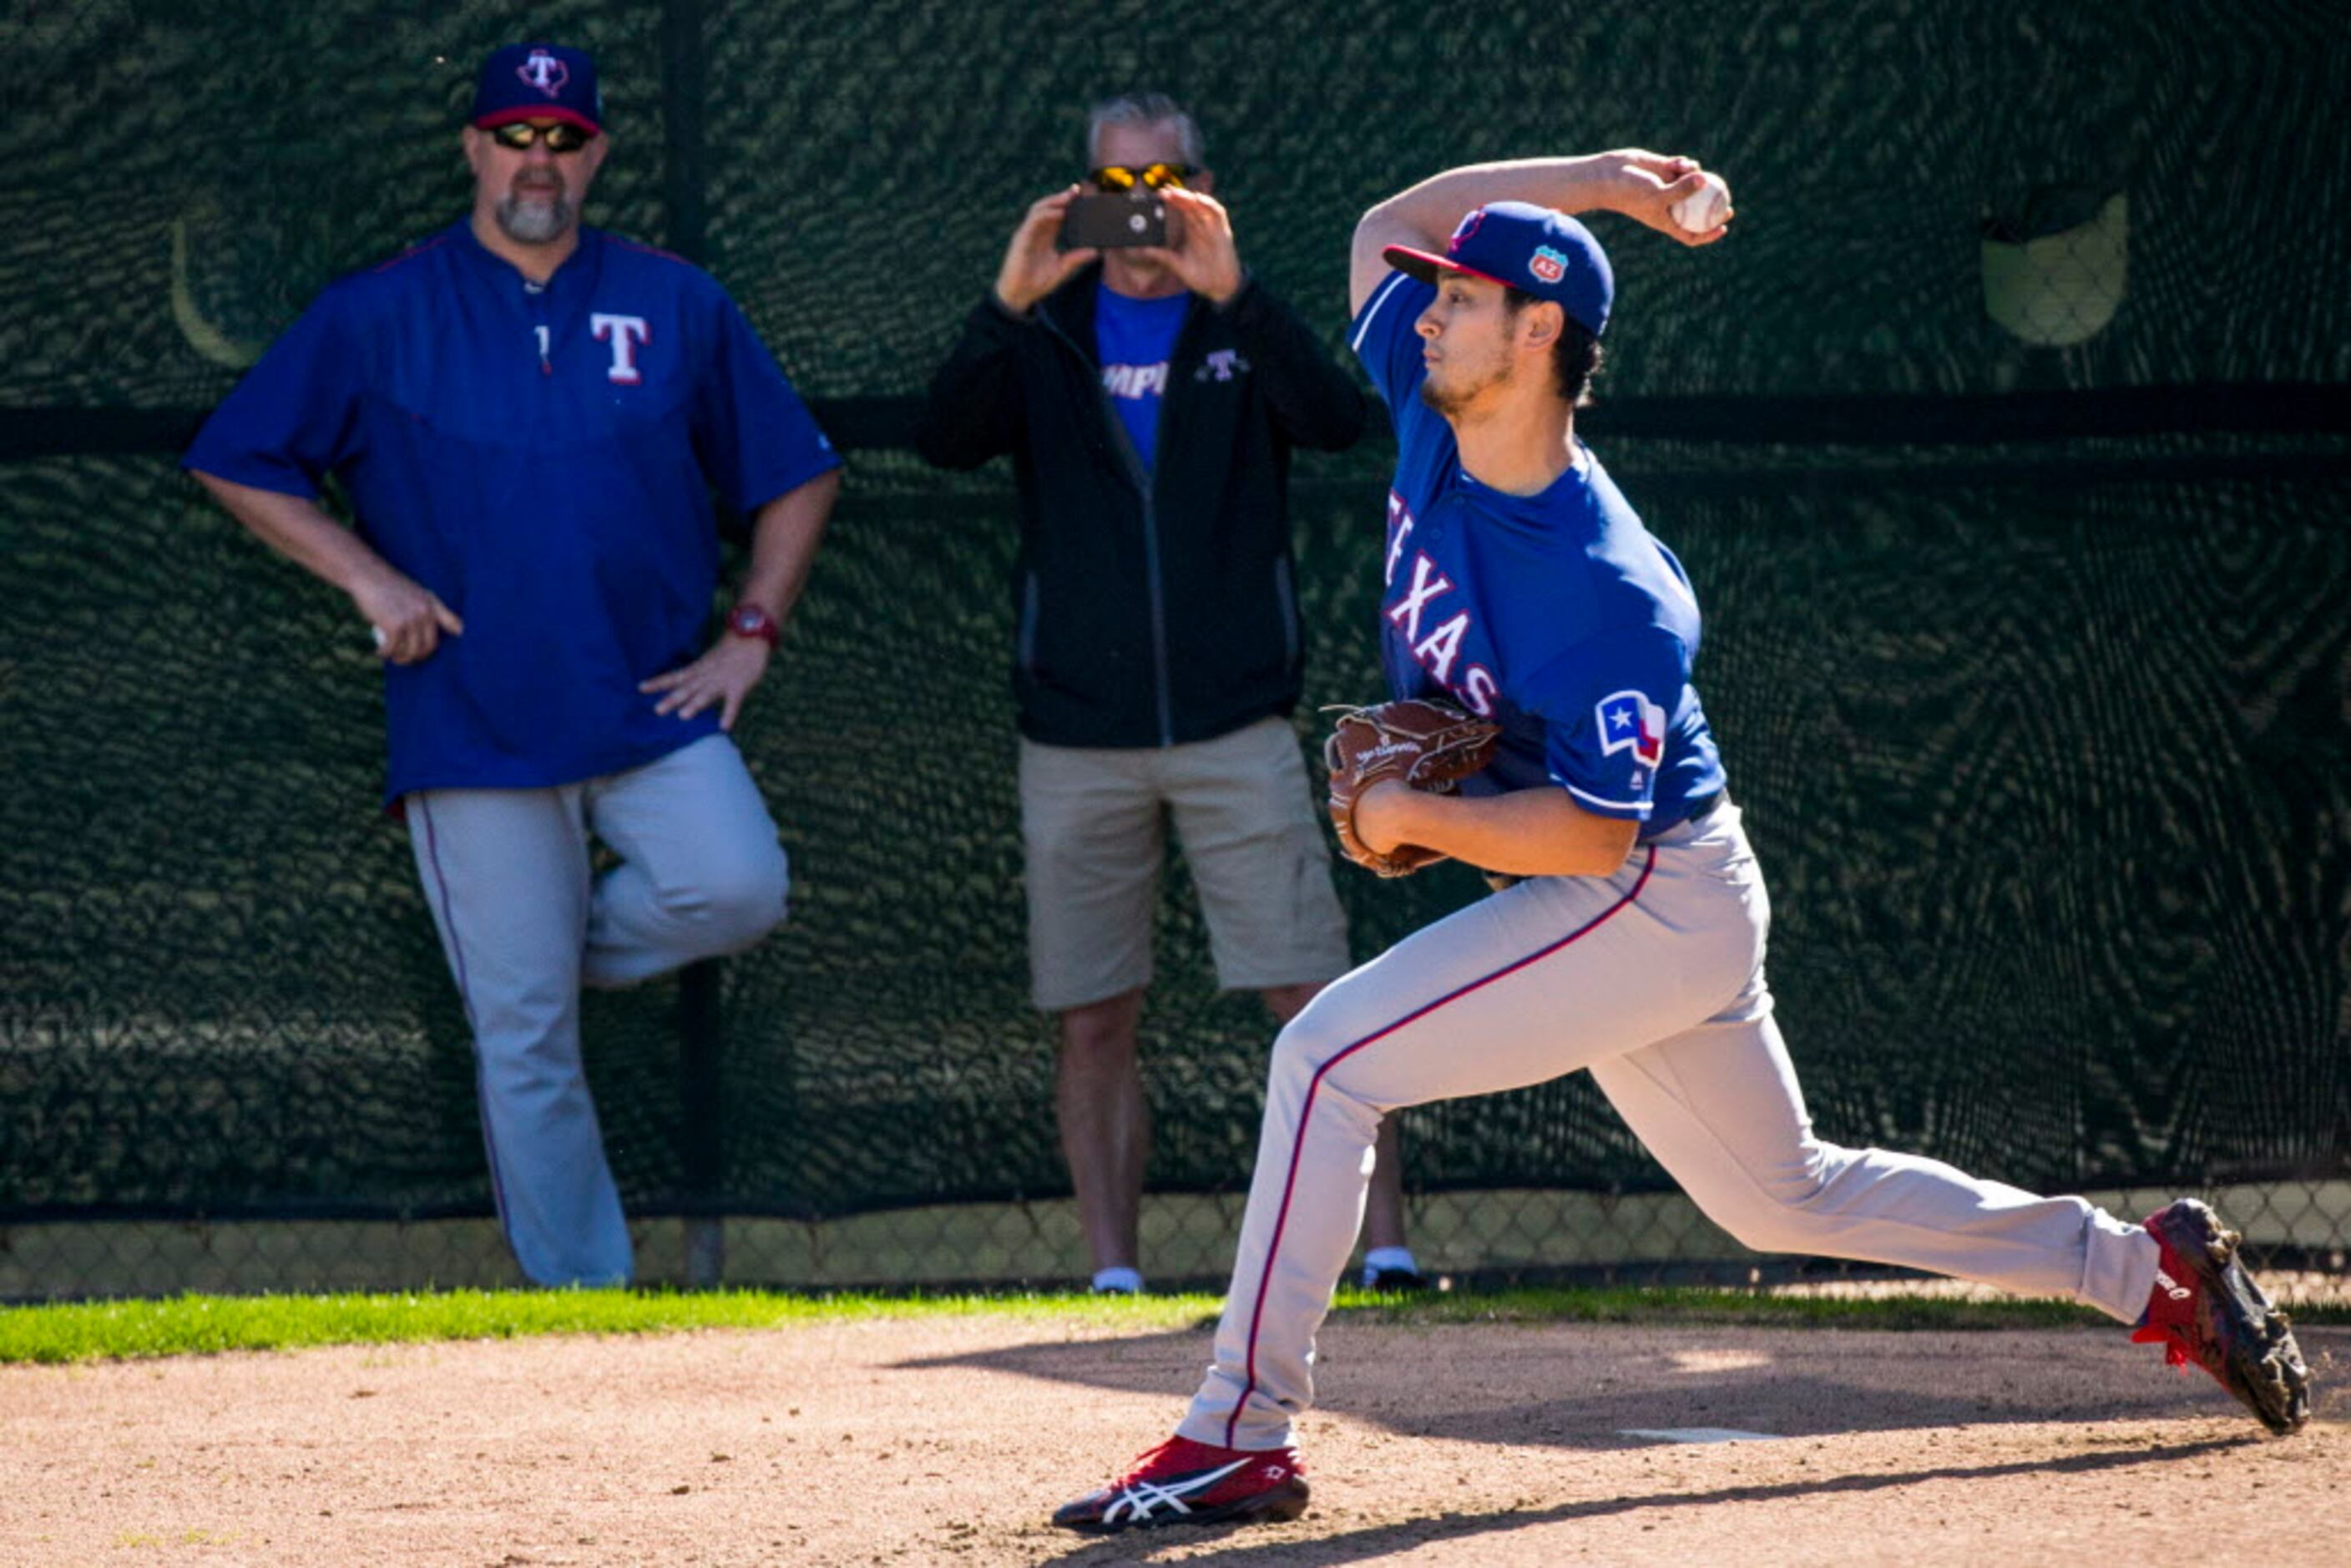 Yu Darvish offered $1,000 to minor-leaguers for a HR off of him in his  latest rehab session